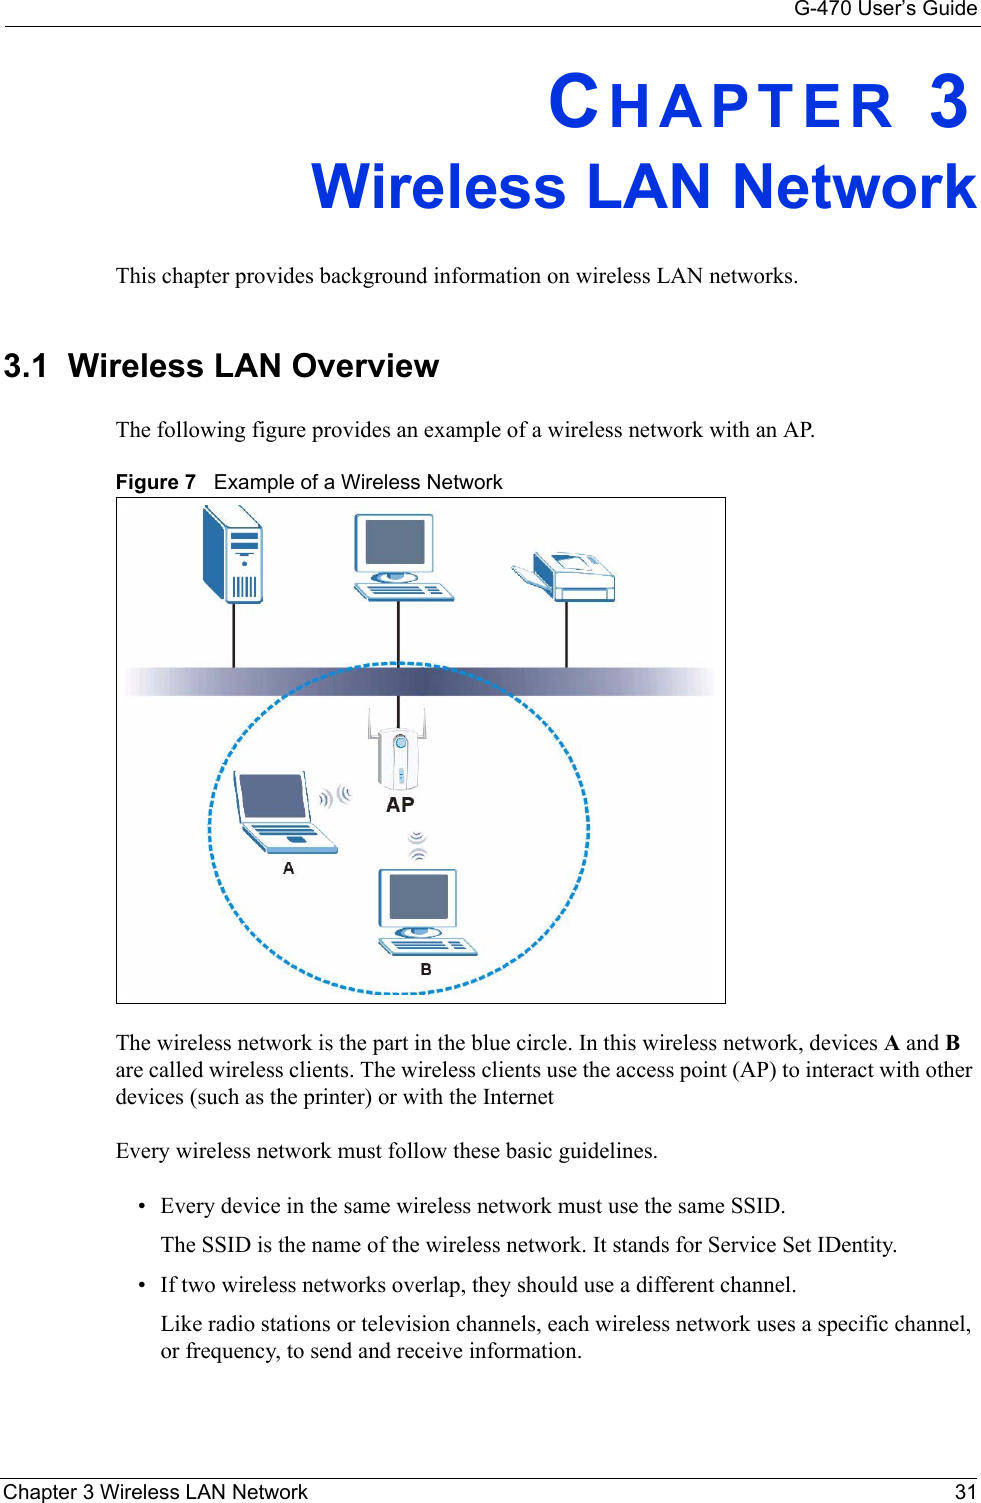 G-470 User’s GuideChapter 3 Wireless LAN Network 31CHAPTER 3Wireless LAN NetworkThis chapter provides background information on wireless LAN networks.3.1  Wireless LAN Overview The following figure provides an example of a wireless network with an AP. Figure 7   Example of a Wireless NetworkThe wireless network is the part in the blue circle. In this wireless network, devices A and B are called wireless clients. The wireless clients use the access point (AP) to interact with other devices (such as the printer) or with the InternetEvery wireless network must follow these basic guidelines.• Every device in the same wireless network must use the same SSID.The SSID is the name of the wireless network. It stands for Service Set IDentity.• If two wireless networks overlap, they should use a different channel.Like radio stations or television channels, each wireless network uses a specific channel, or frequency, to send and receive information.